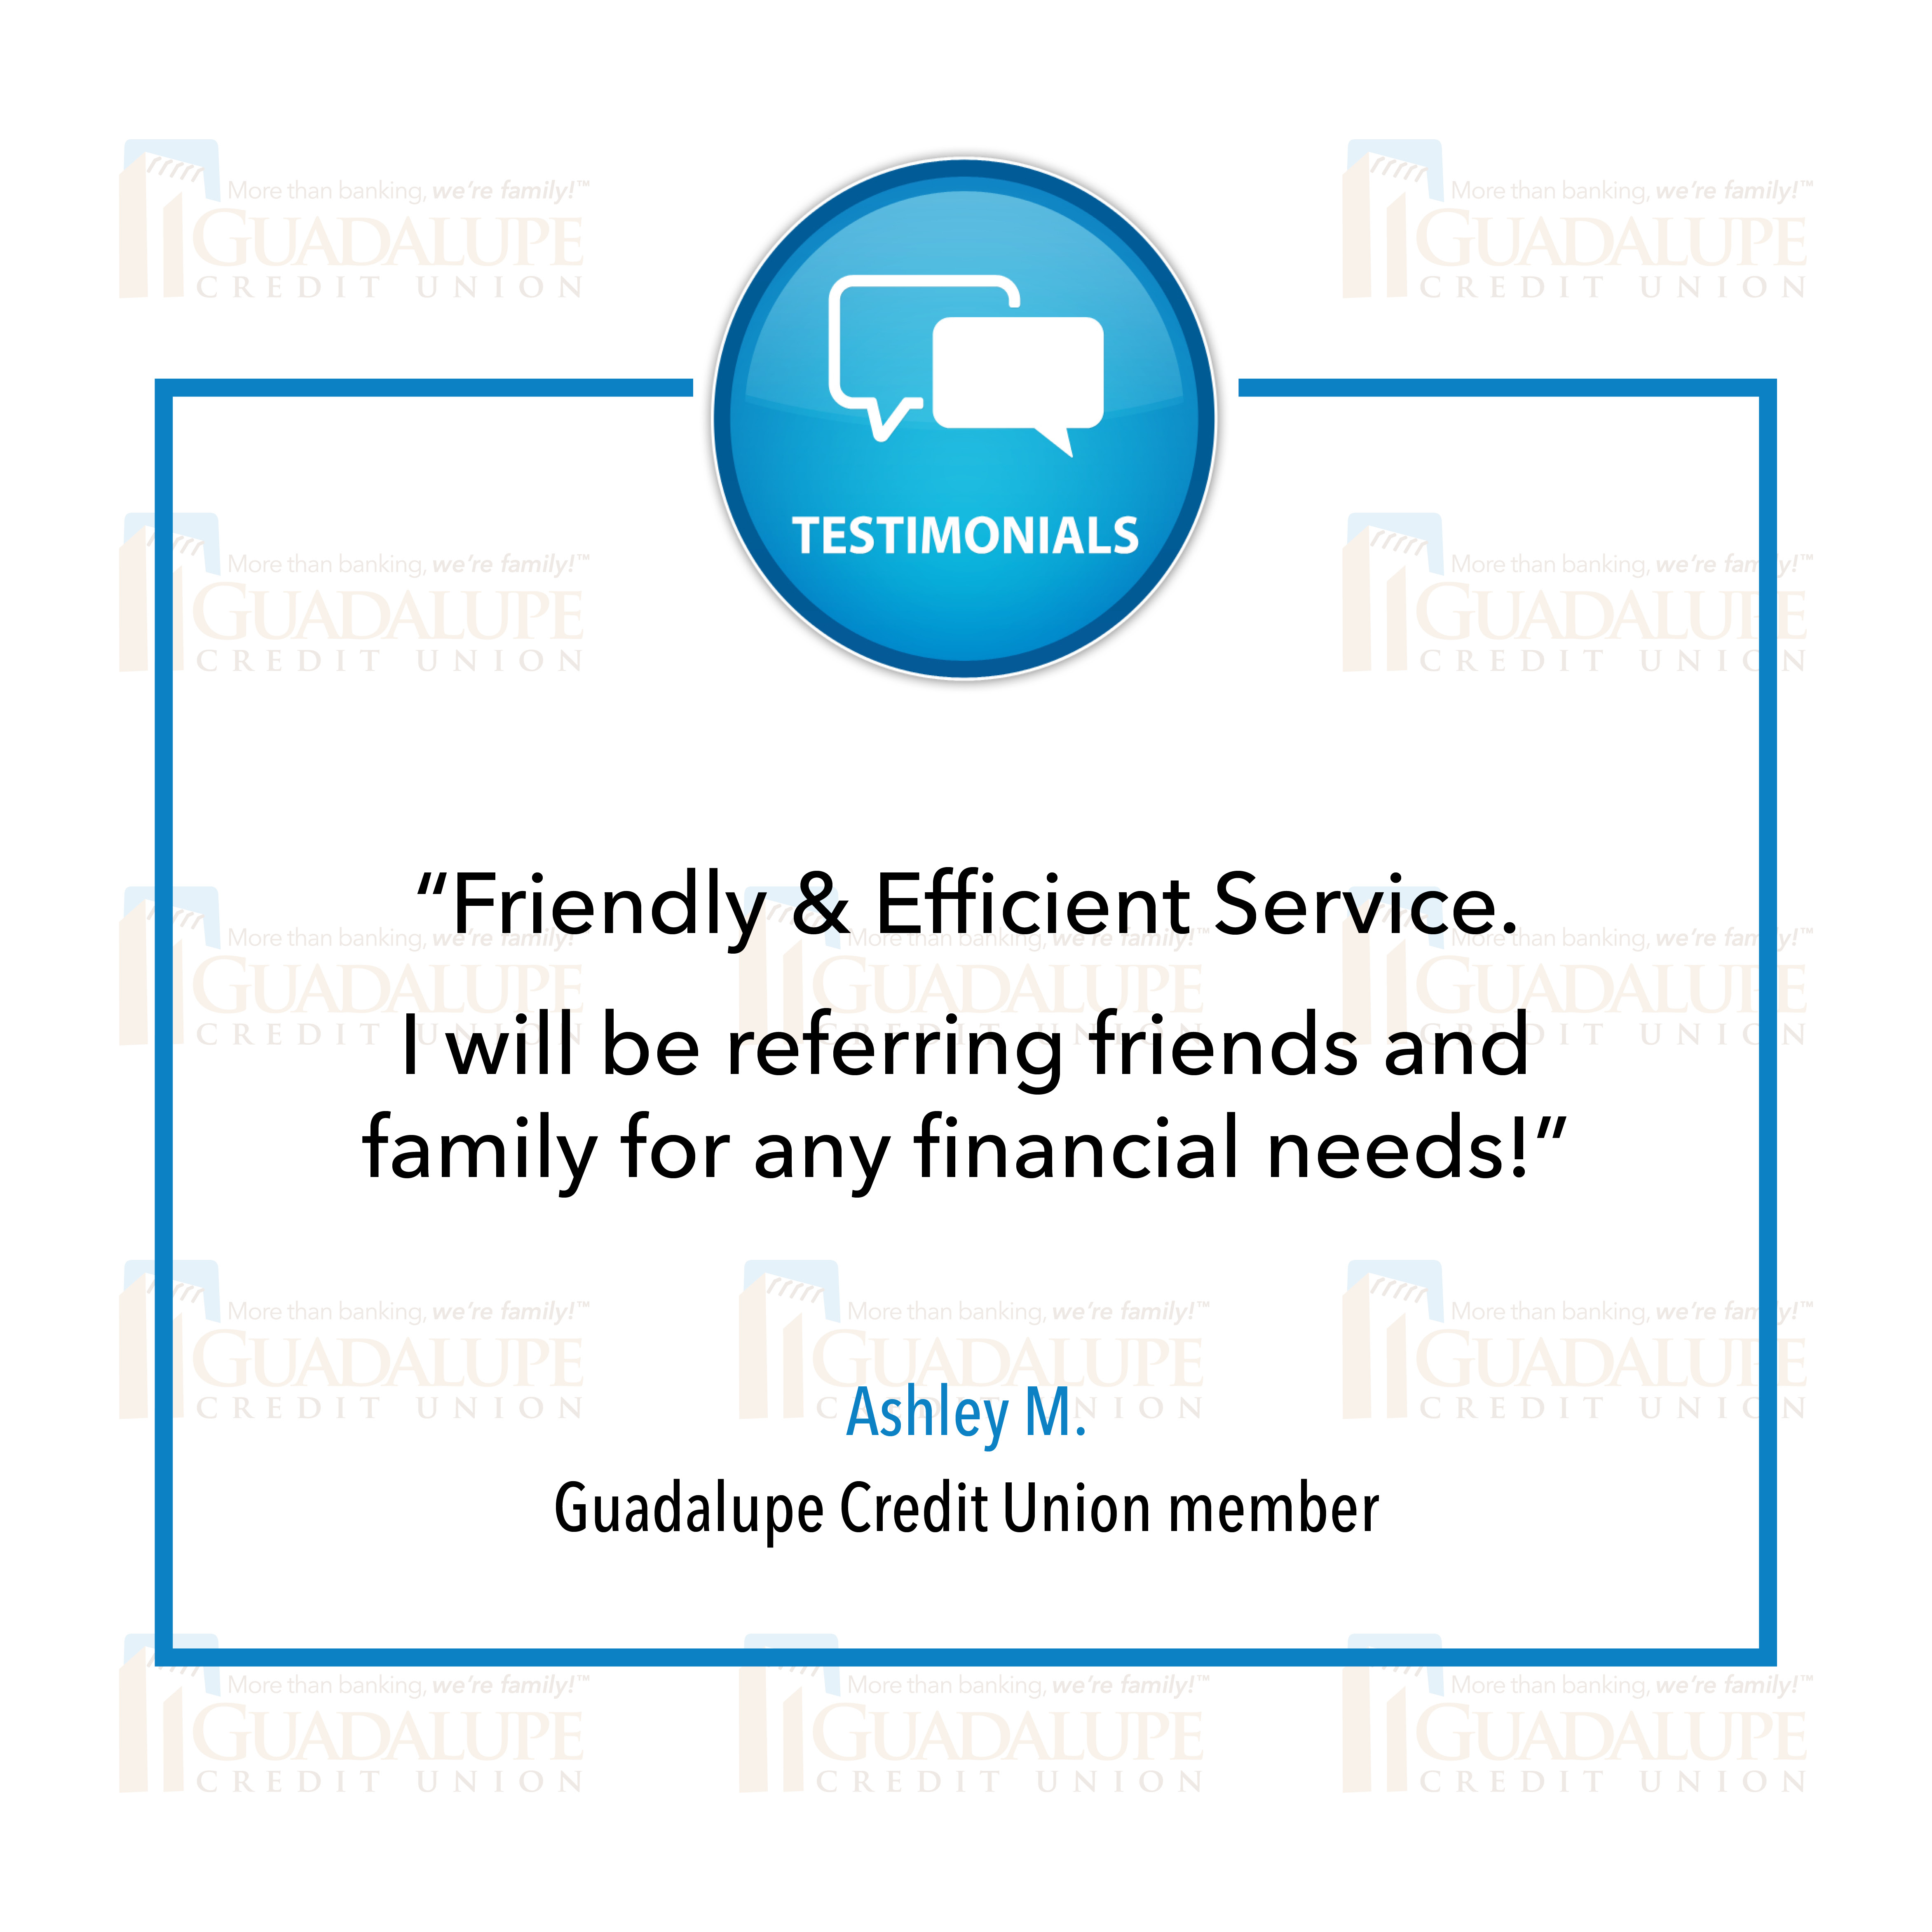 GCU Testimonial - "Friendly & efficient service. I will be referring friends and family for any financial needs!"